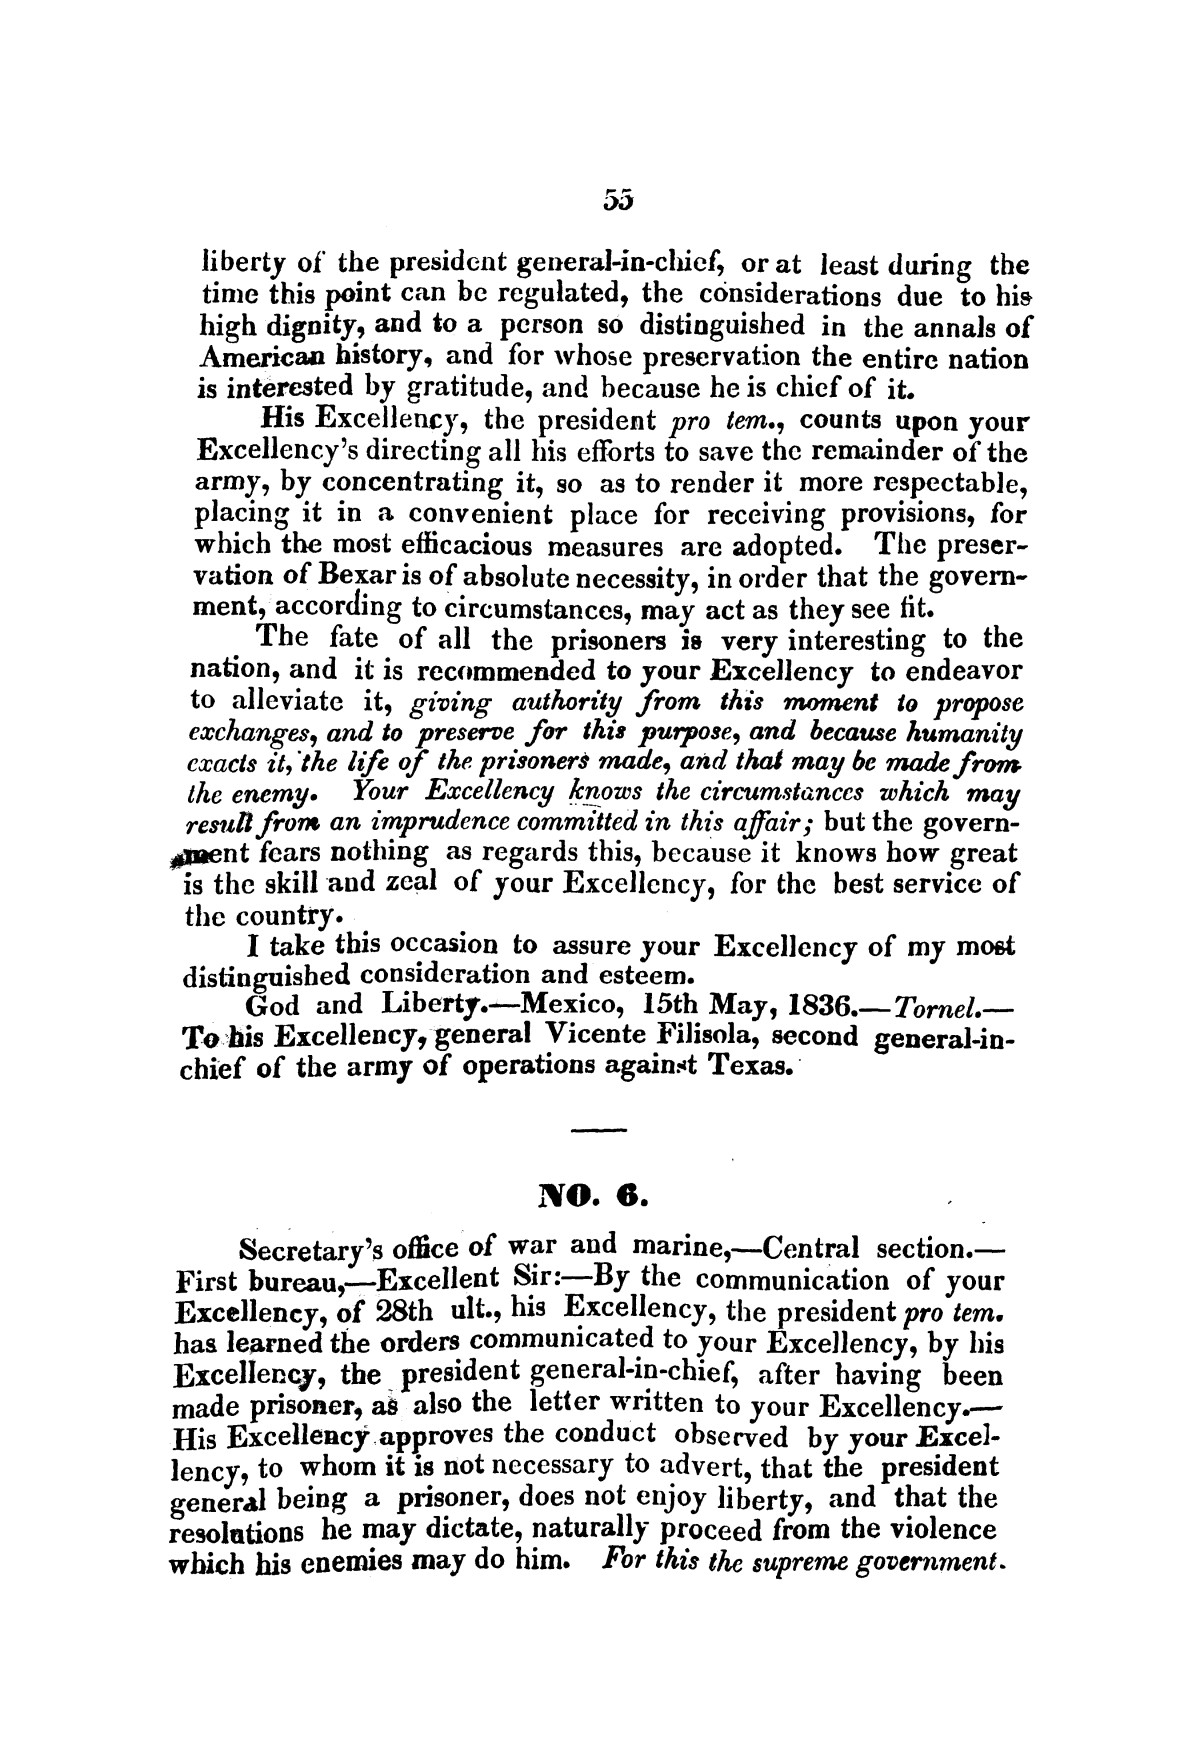 Evacuation of Texas : translation of the Representation addressed to the supreme government / by Vicente Filisola, in defence of his honor, and explanation of his operations as commander-in-chief of the army against Texas.
                                                
                                                    [Sequence #]: 58 of 72
                                                